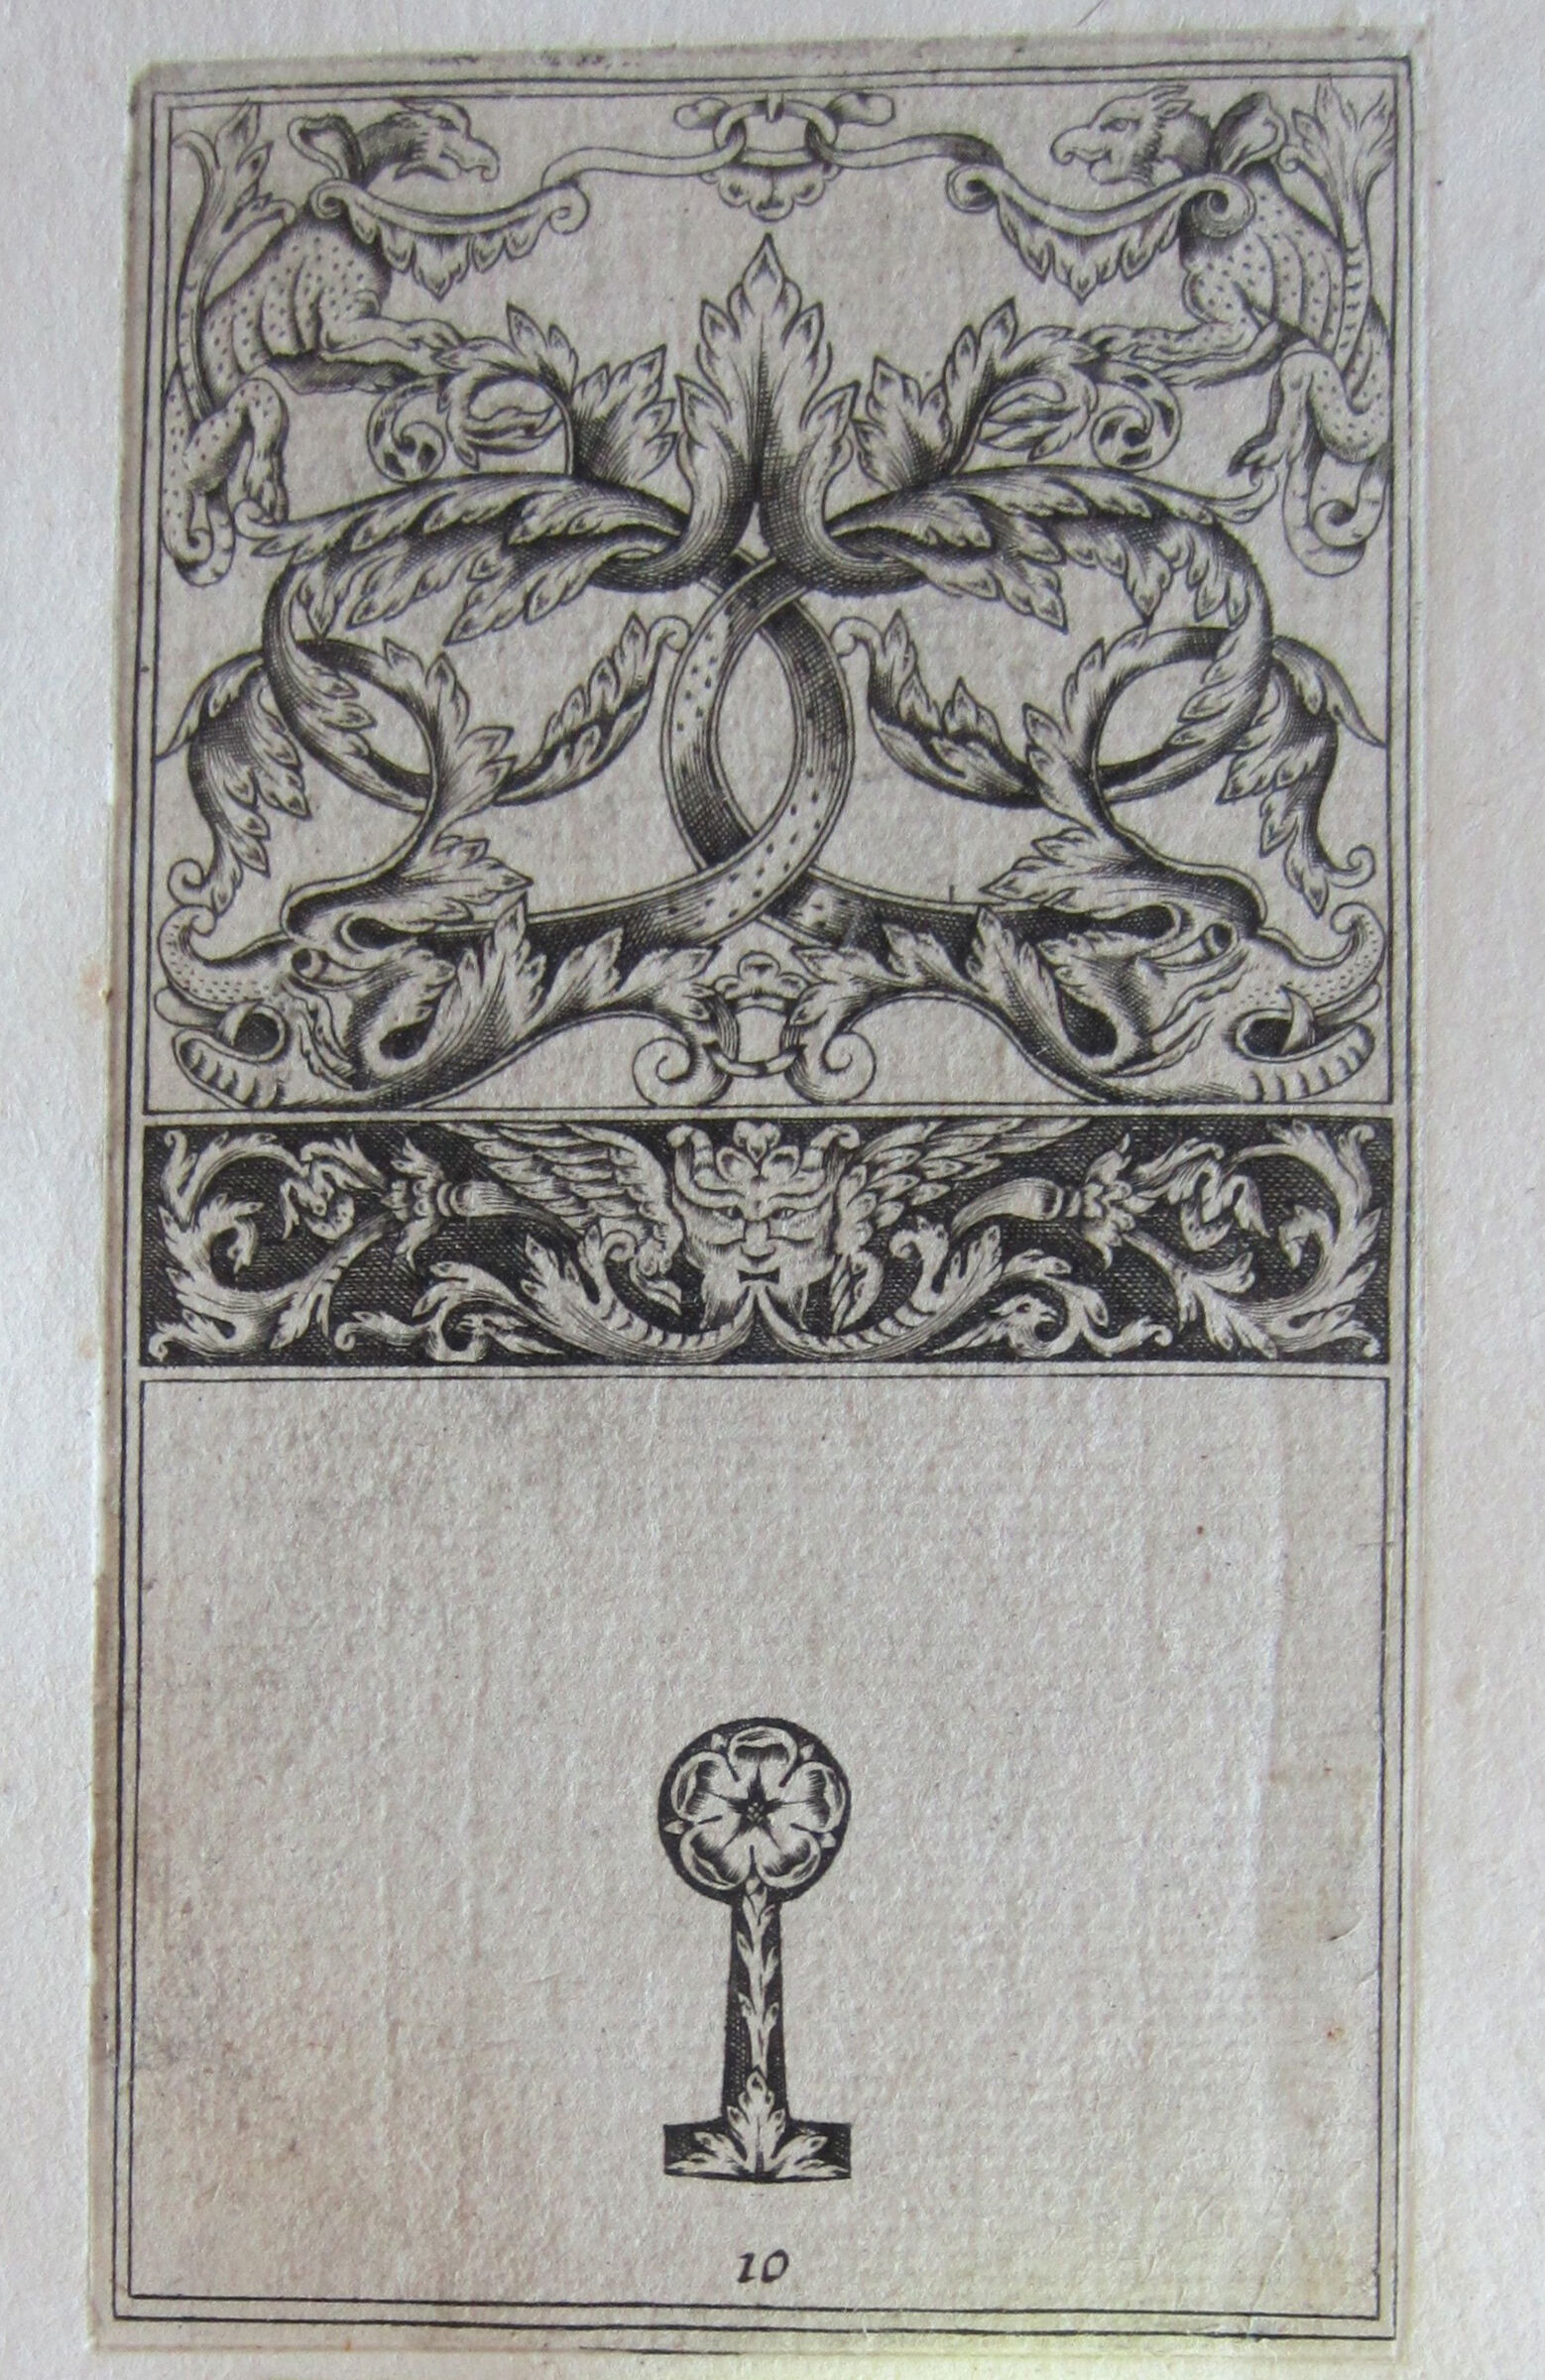 Foliate Interlace With Two Monstrous Animals, Frieze With A Winged Satyr's Mask, The Keyhole Below With A Rose